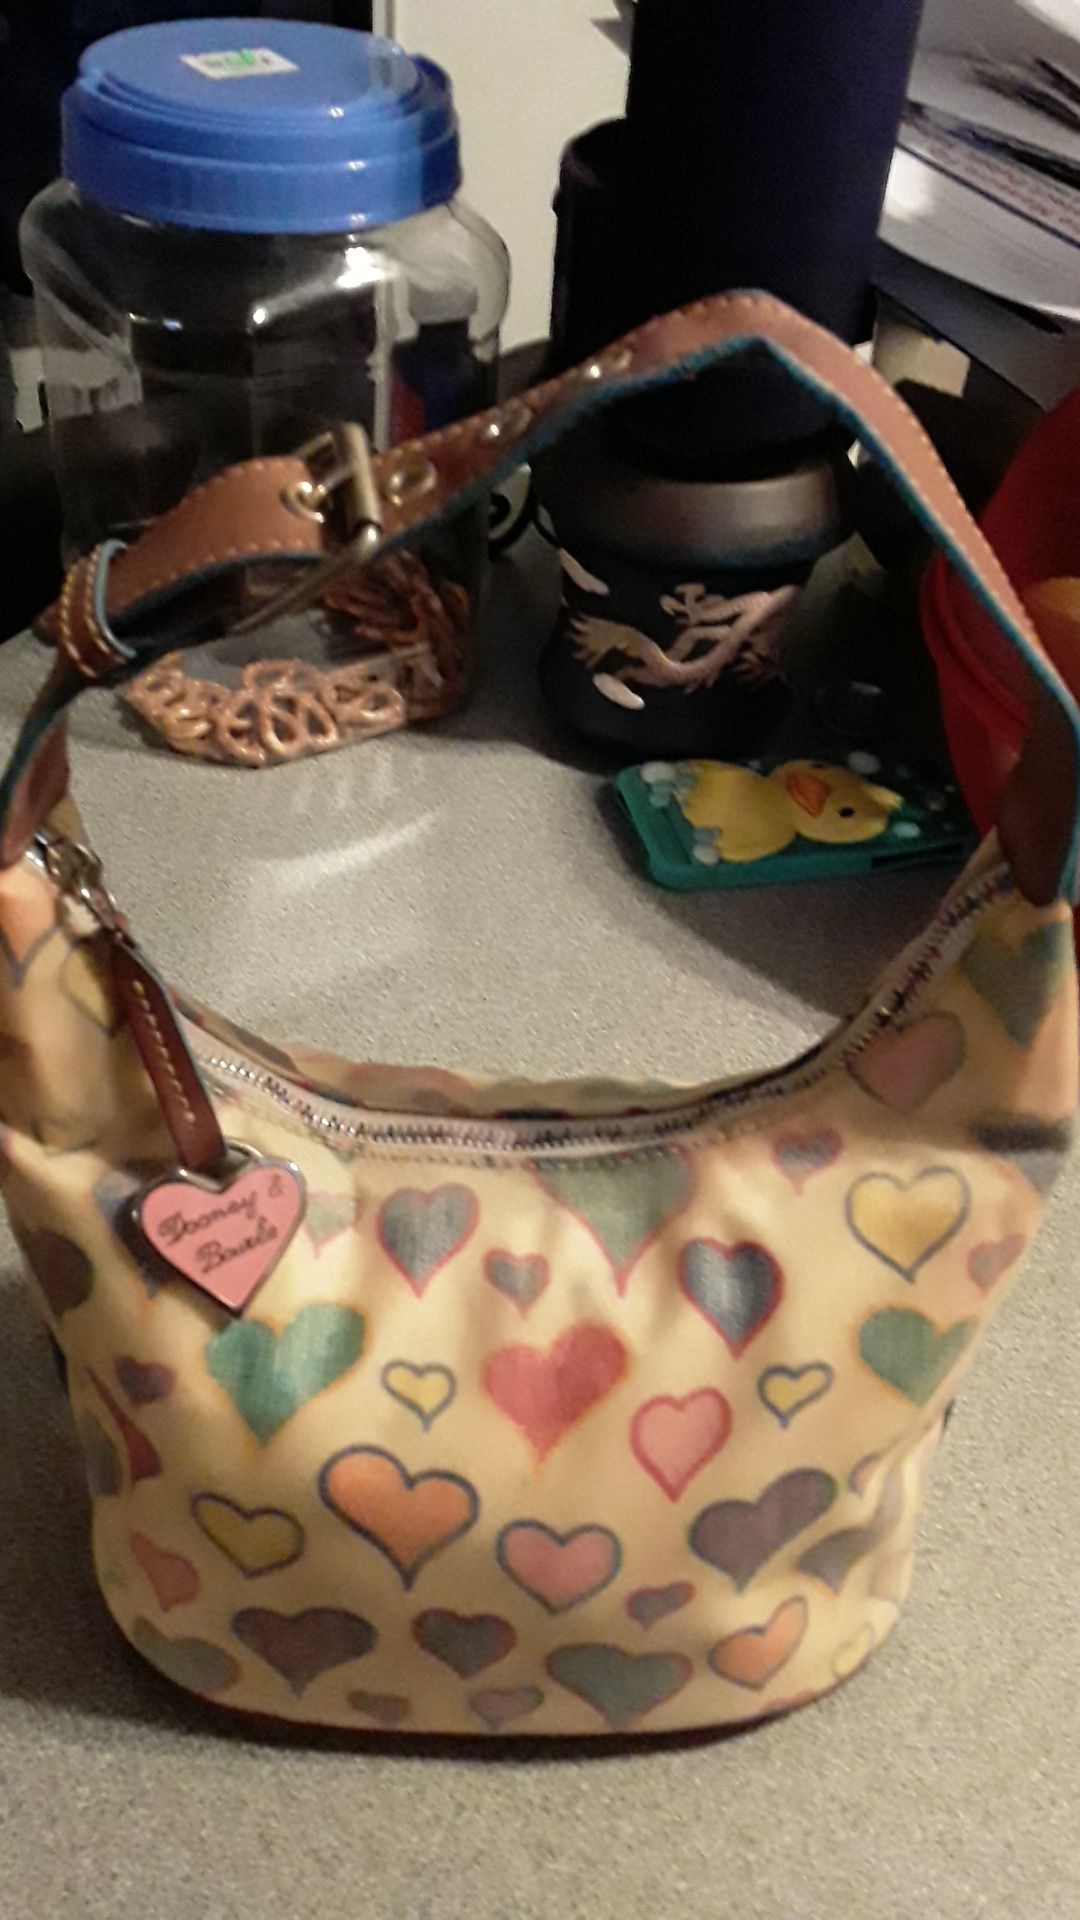 Rare Discontinued Americana Dooney & Bourke Weekender for Sale in Willow  Springs, CA - OfferUp